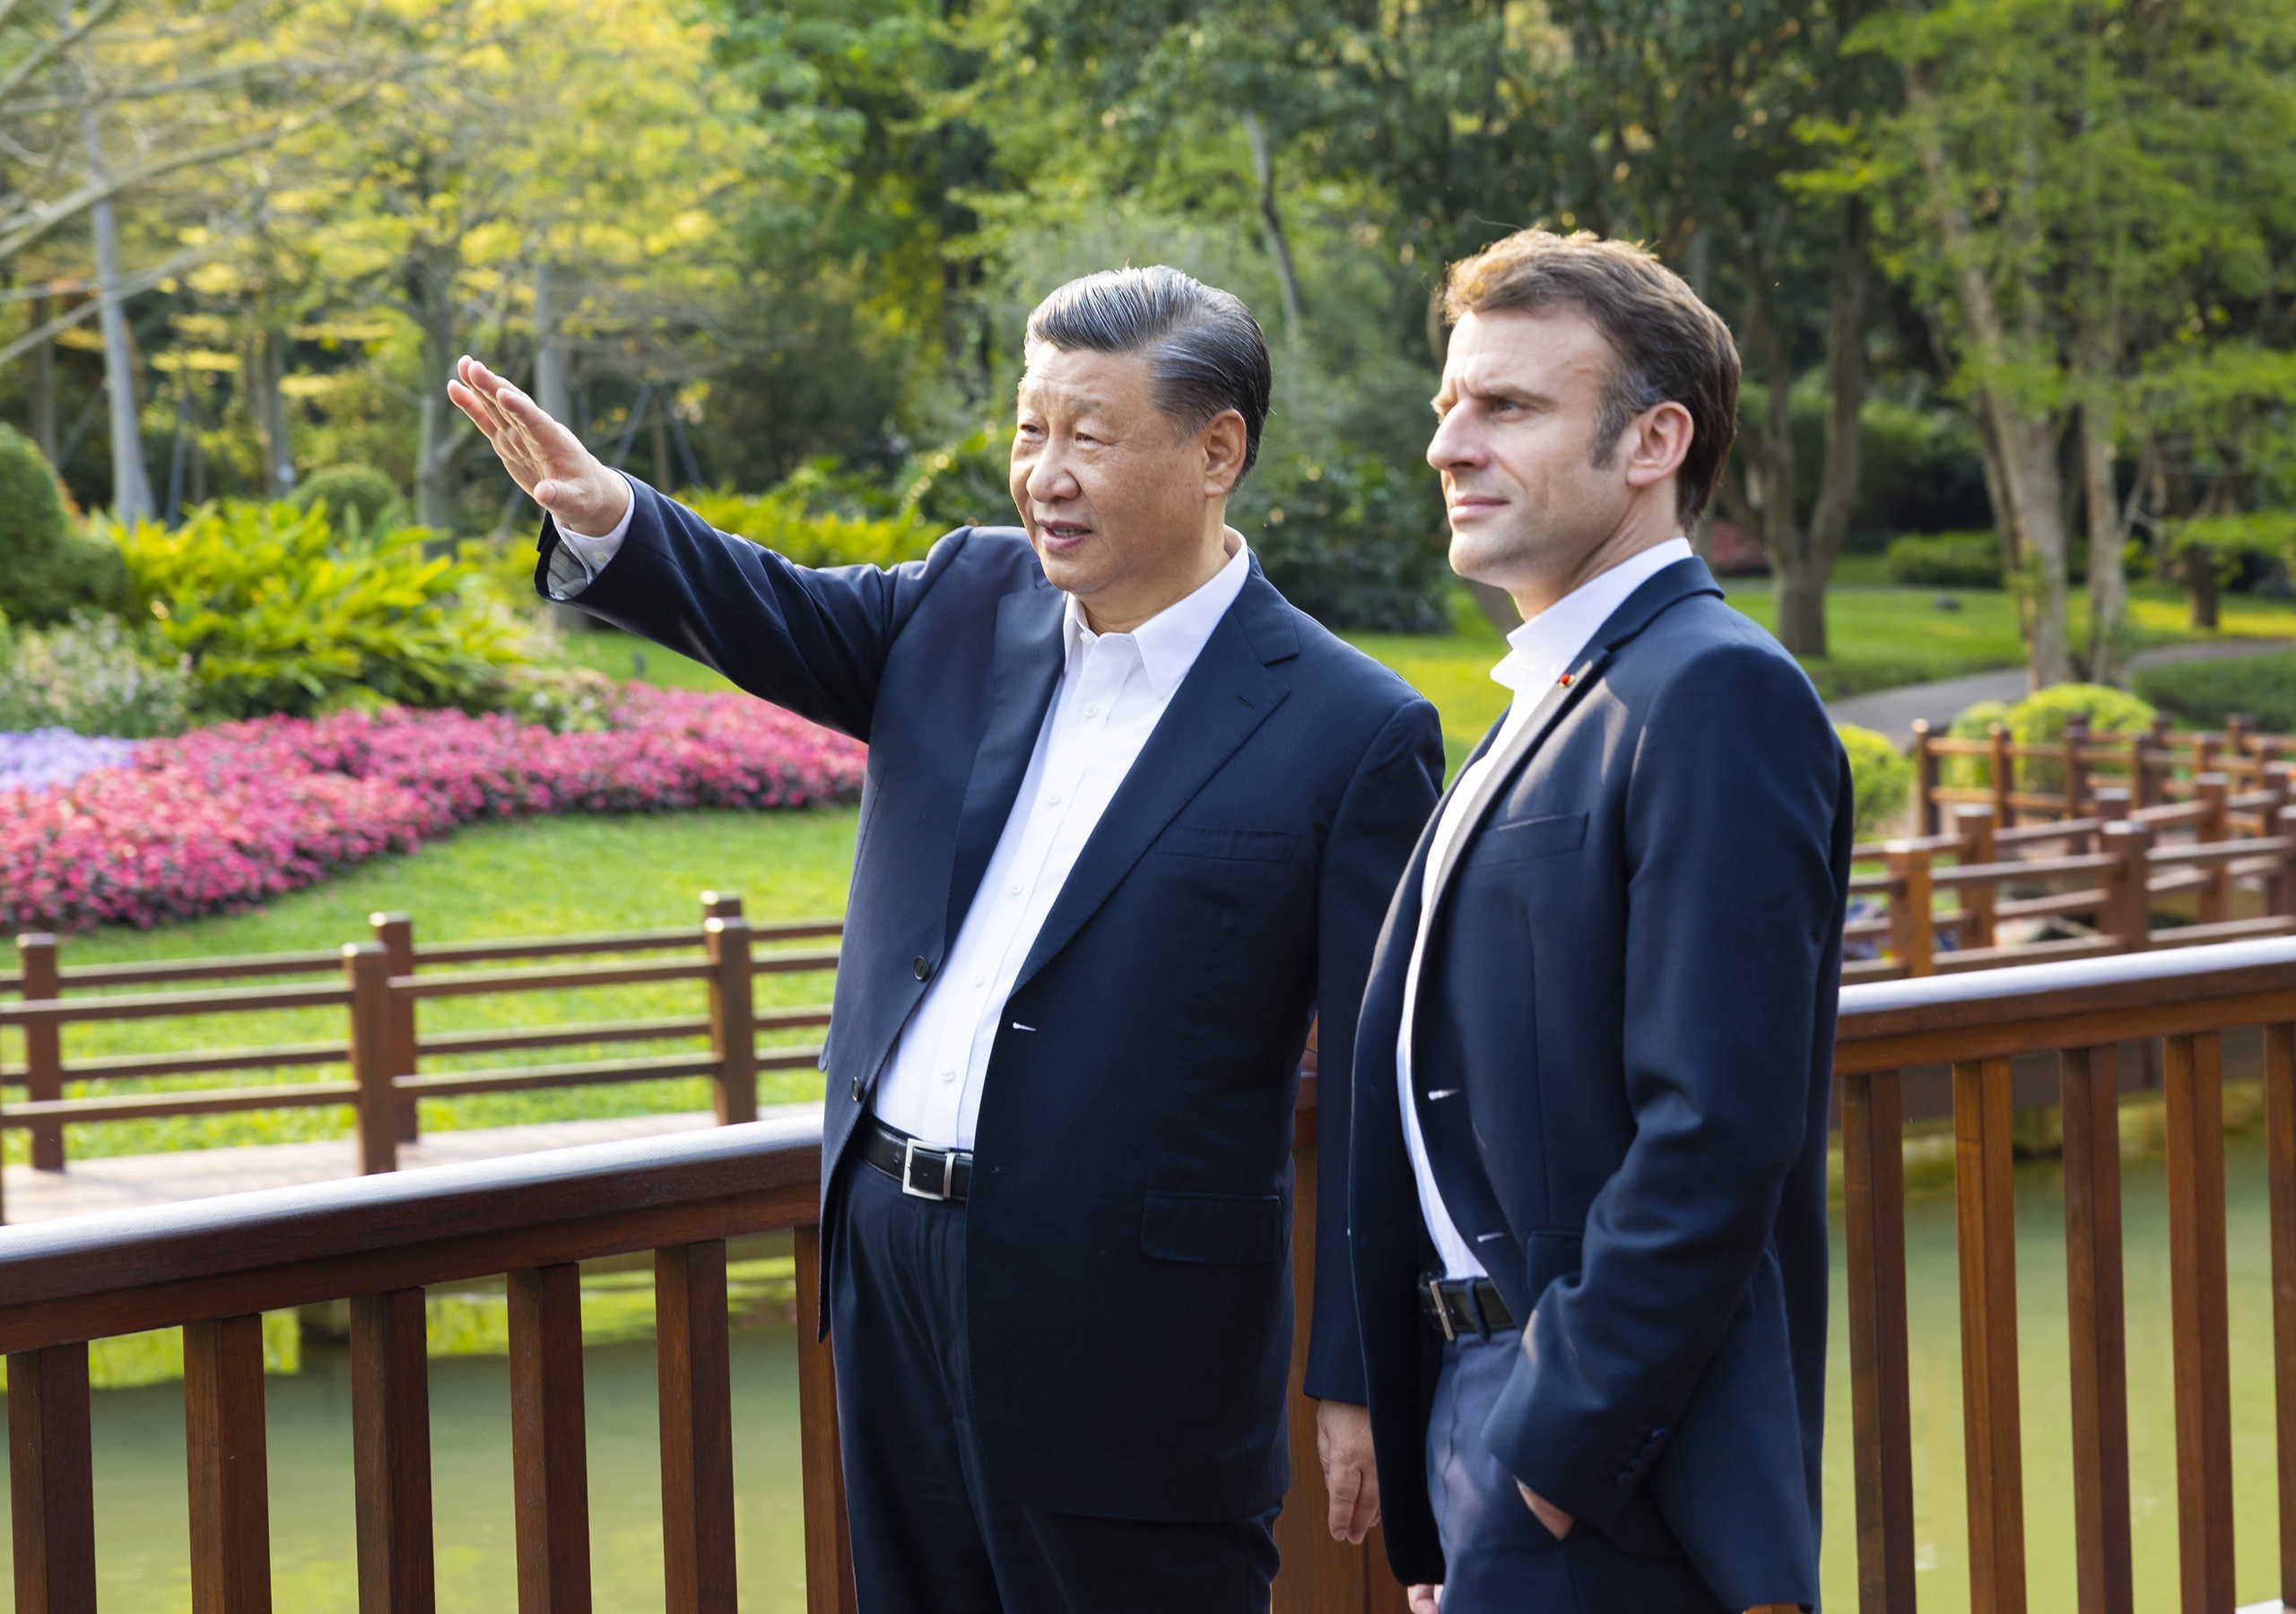 French President Emmanuel Macron is visiting his Chinese counterpart Xi Jinping earlier this week.